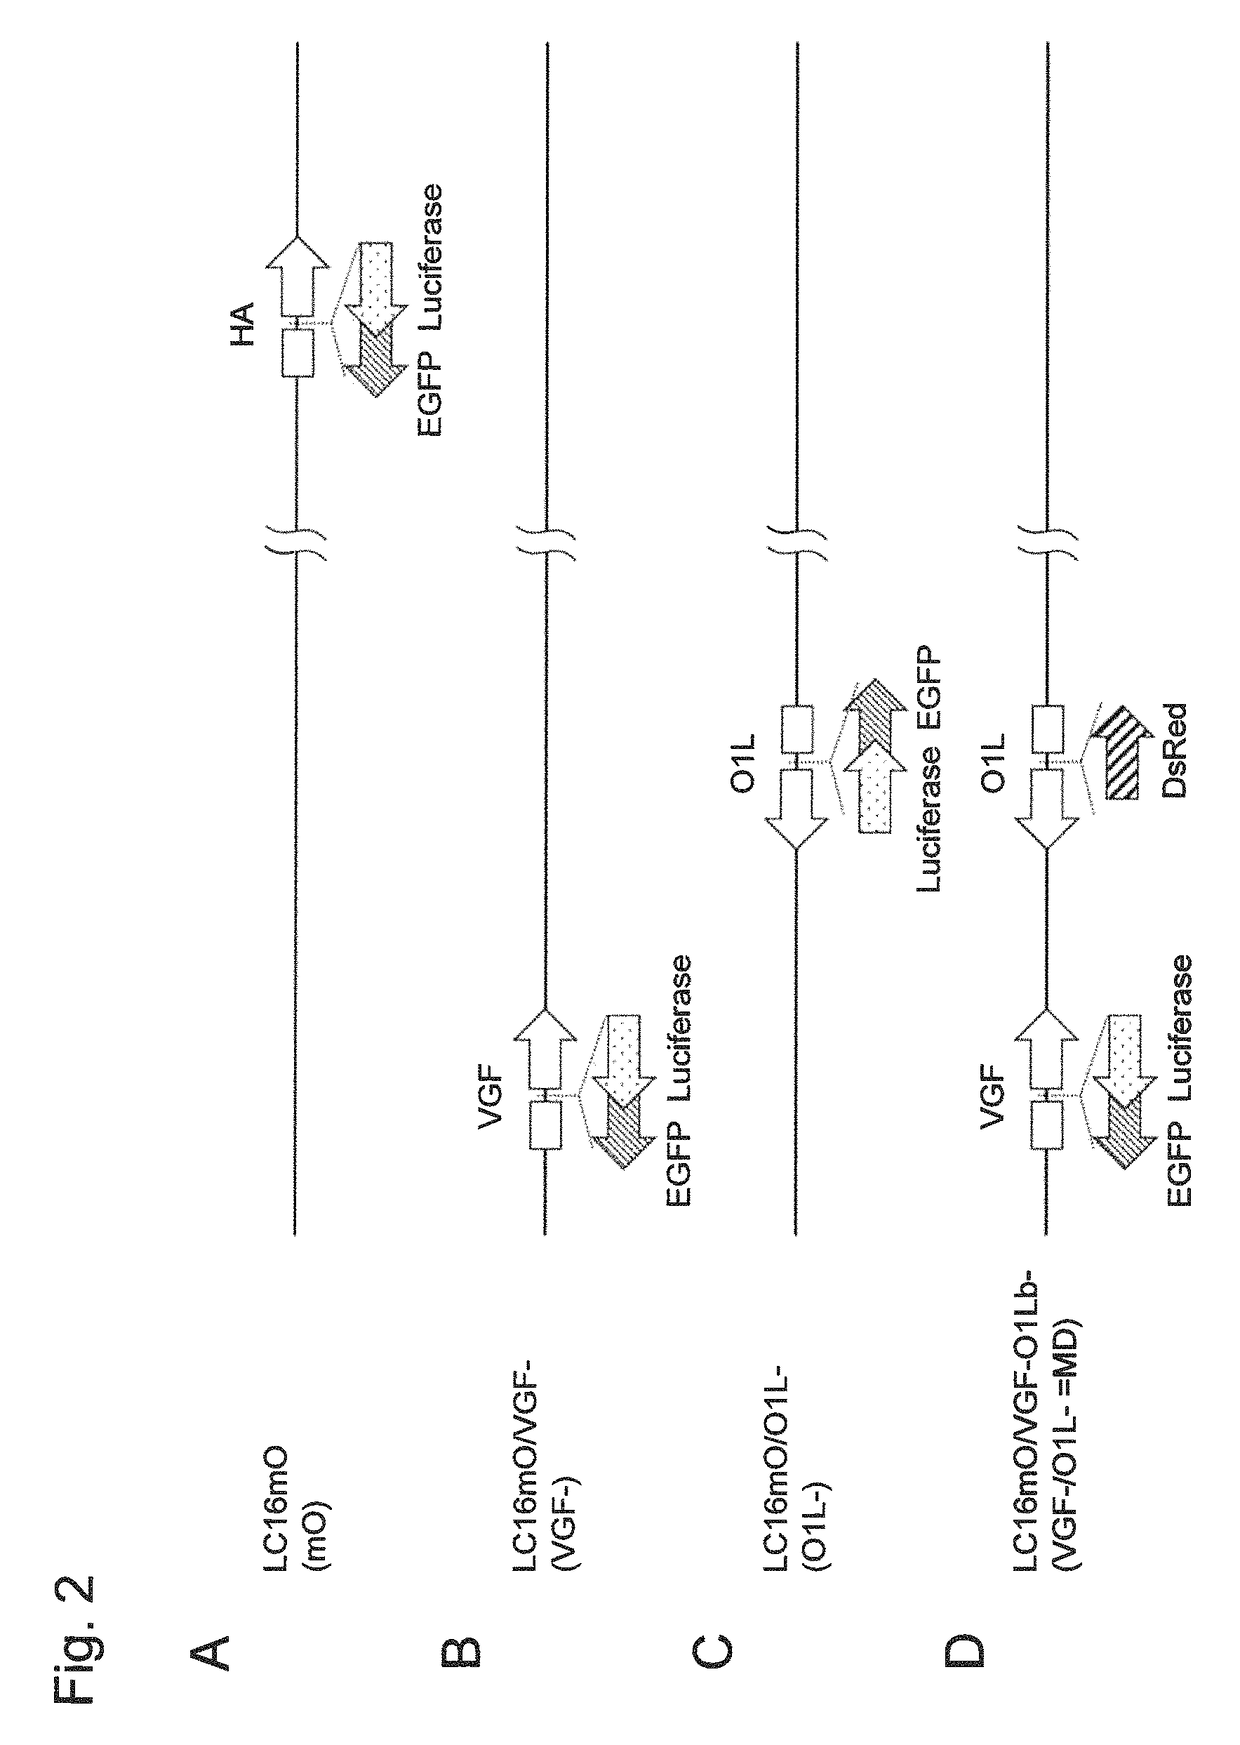 Mitogen-activated protein kinase-dependent recombinant vaccinia virus (MD-RVV) and use thereof